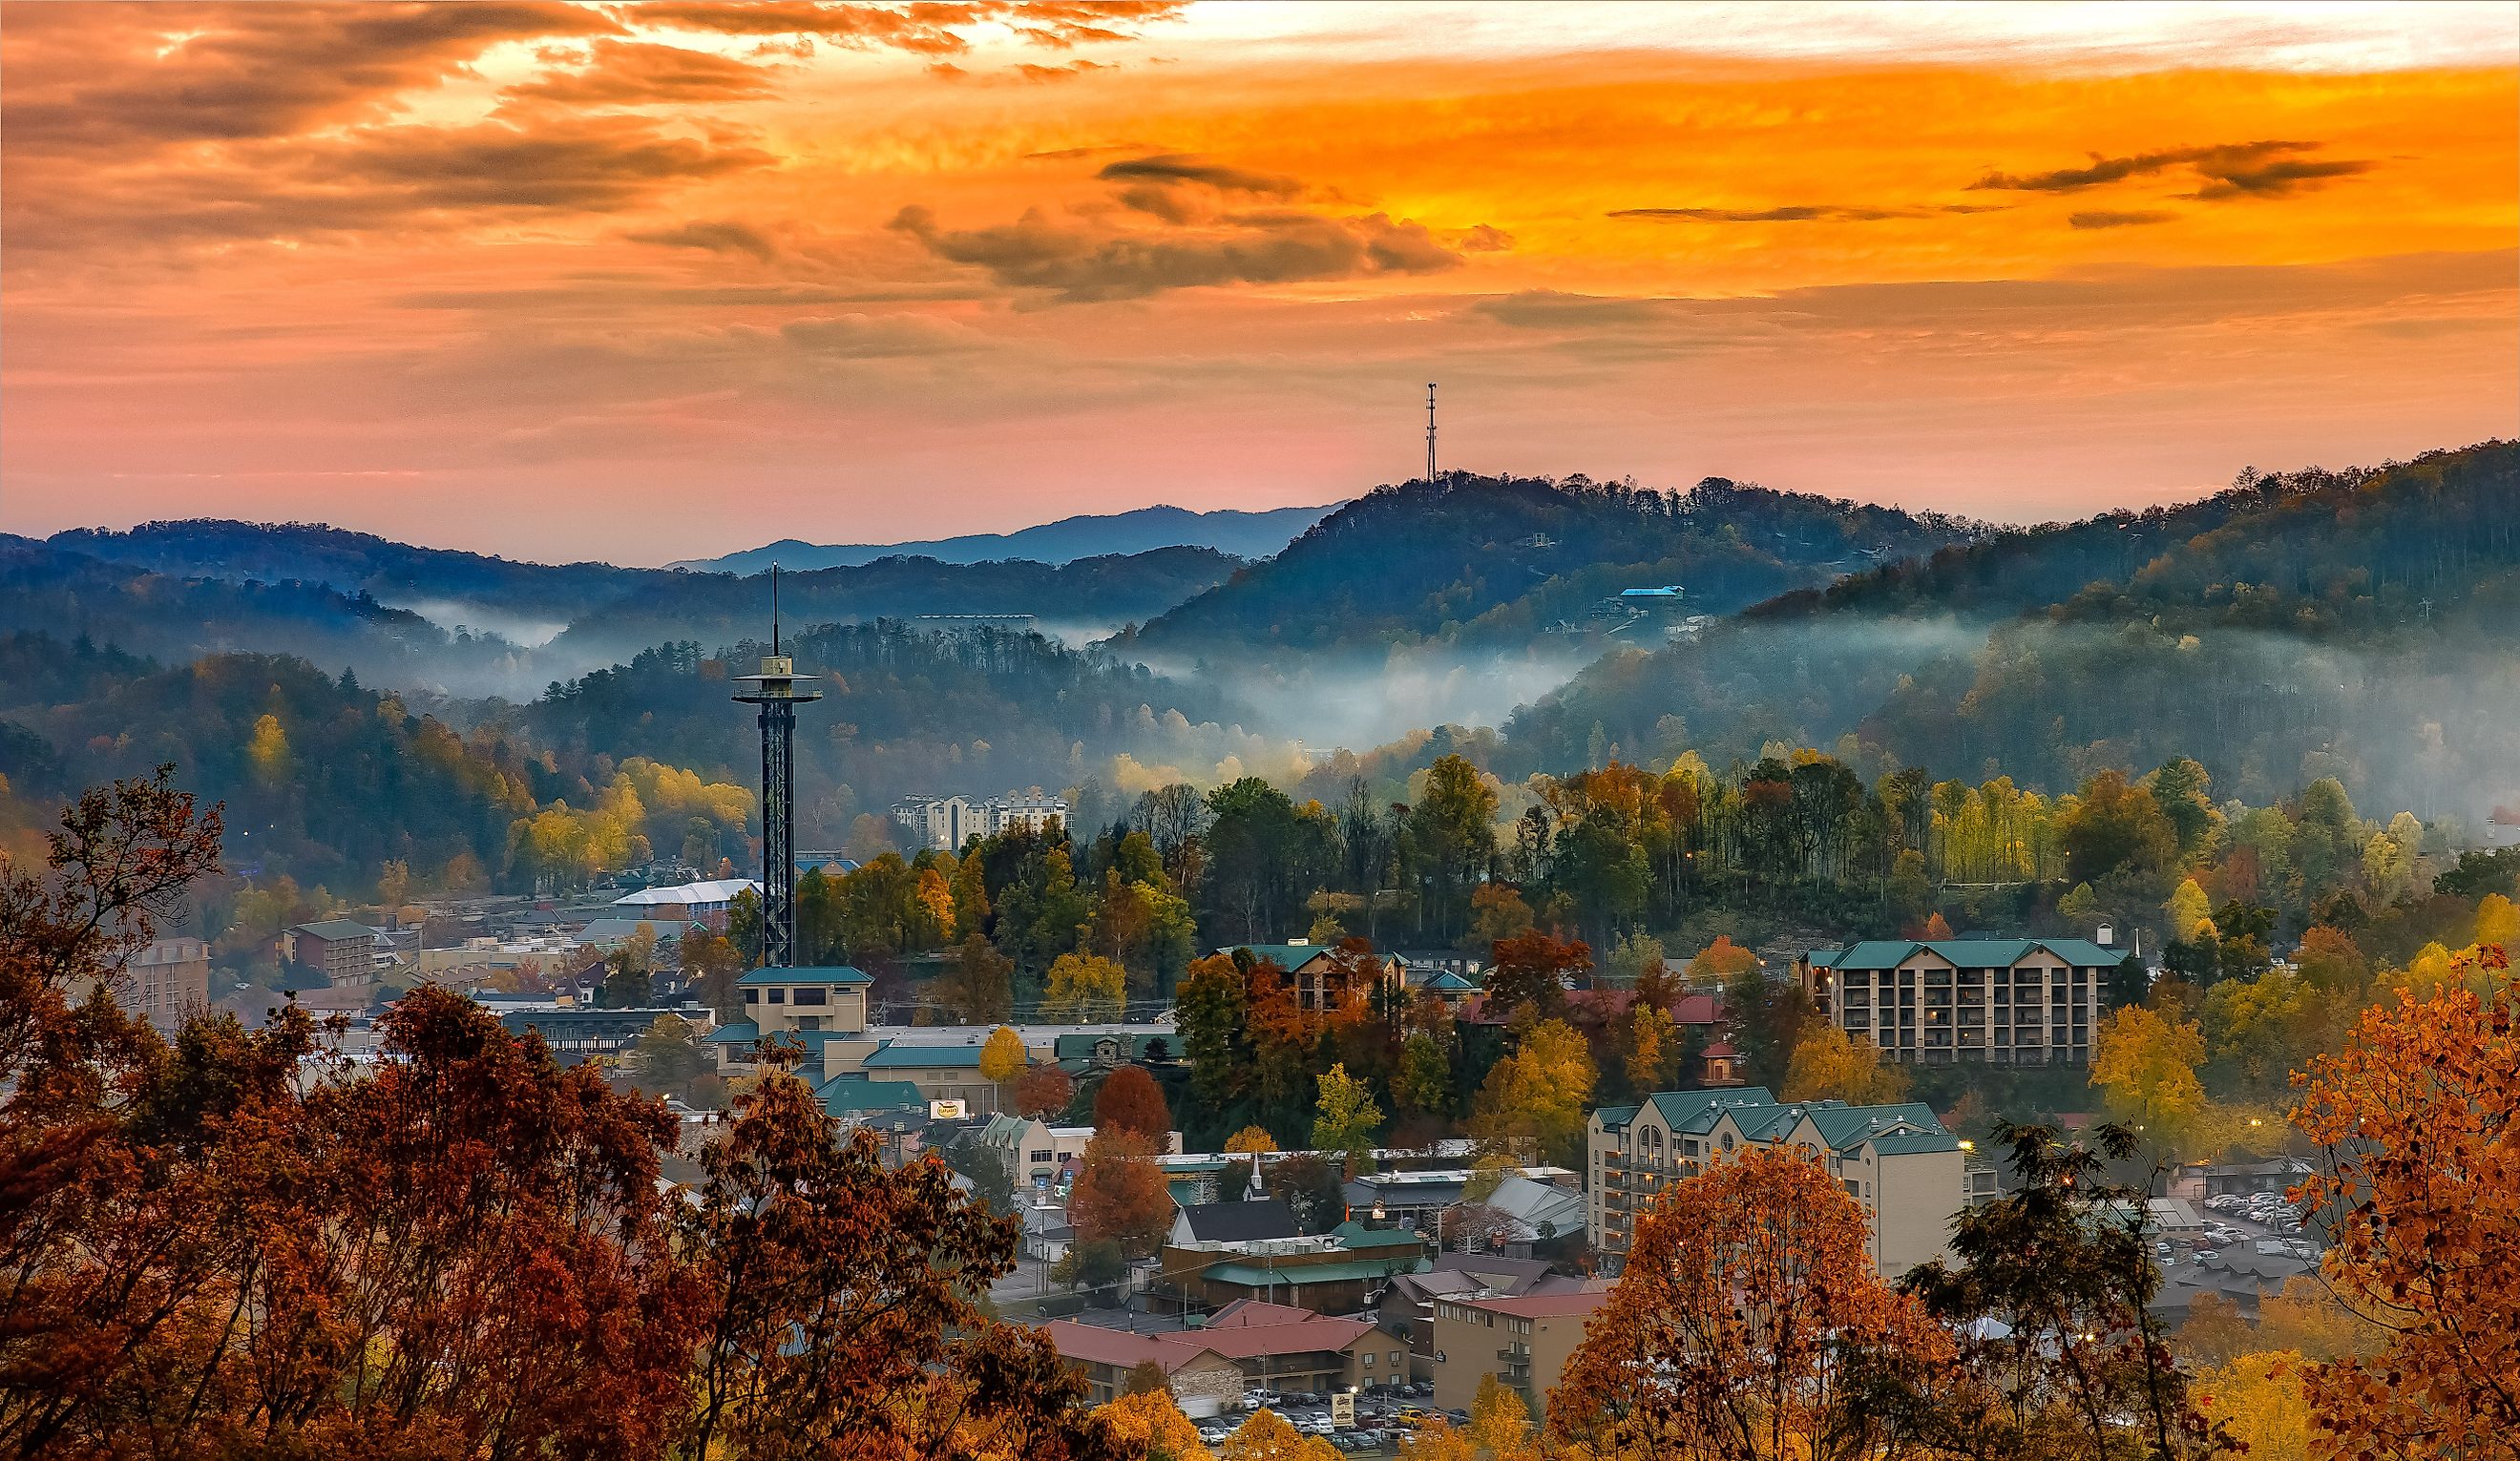 The cityscape of Gatlinburg, Tennessee is a charming blend of mountain town and tourist mecca, with stunning views of the Smoky Mountains as a backdrop.